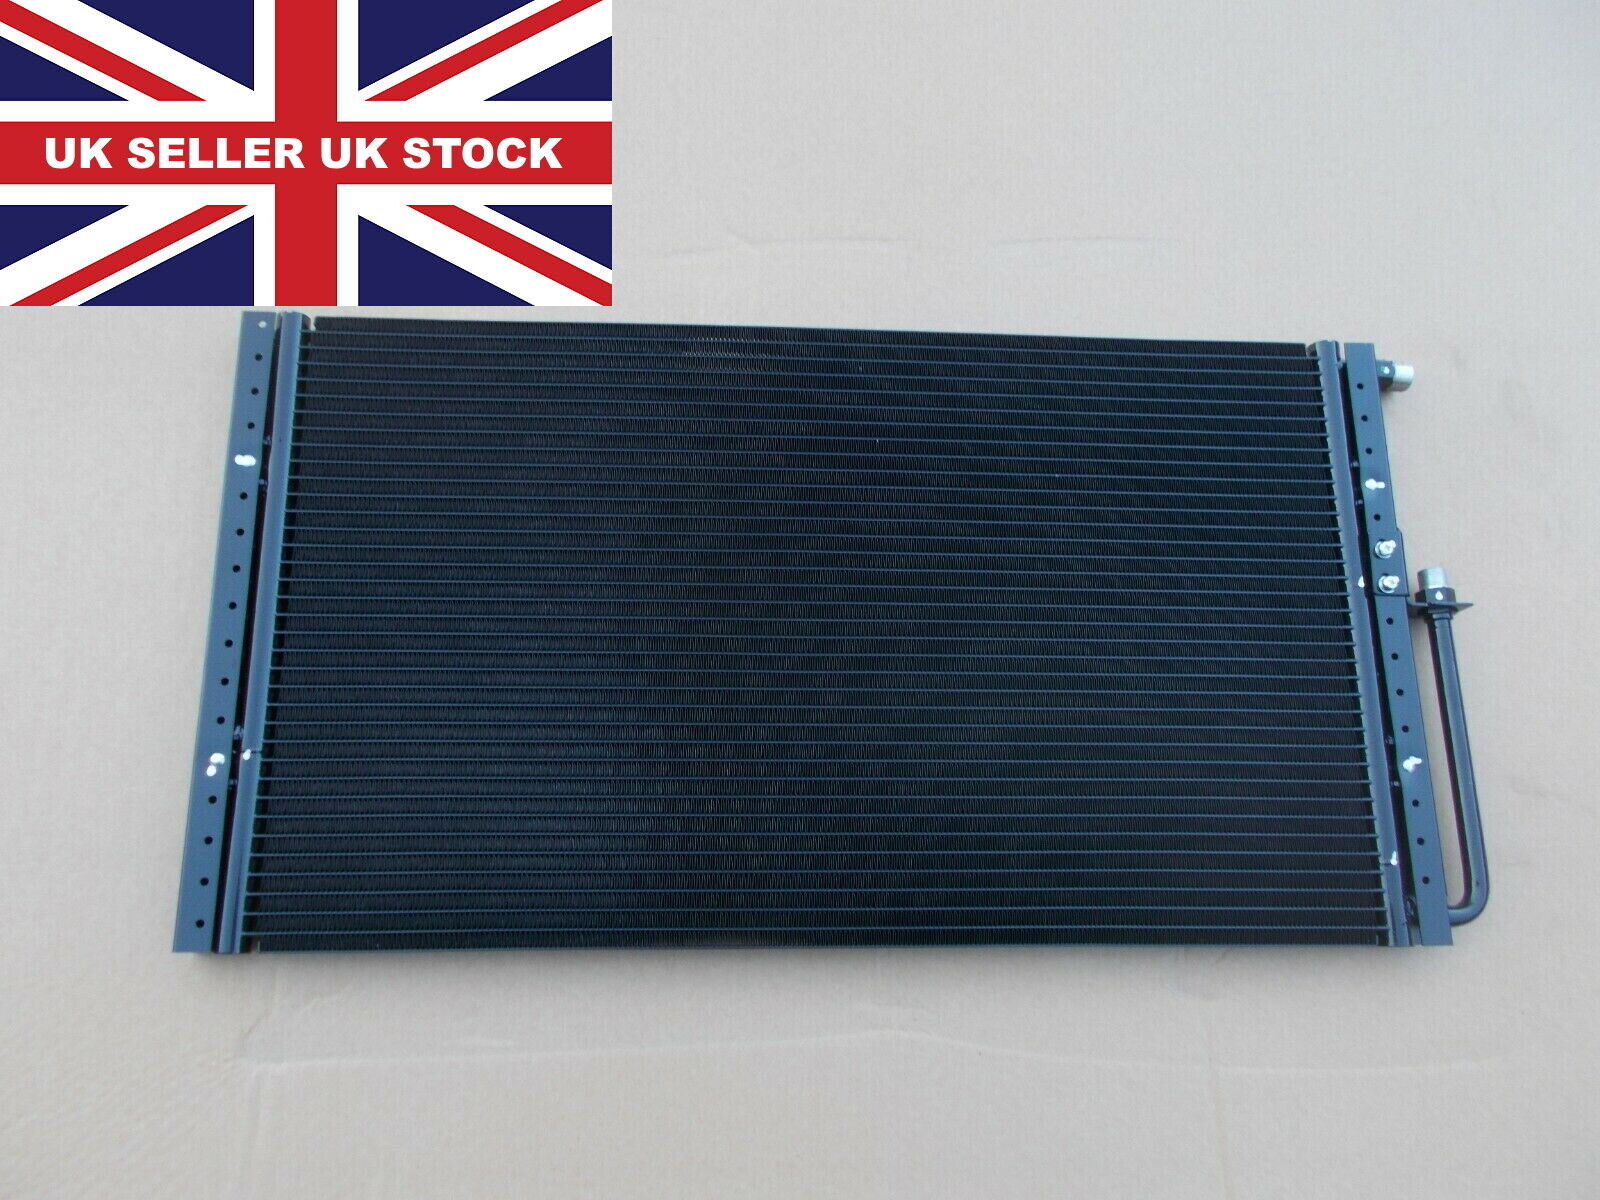 BRAND NEW CONDENSER (AIR CON RADIATOR) FITS TVR CERBERA/CHIMAERA/GRIFFITH/TUSCAN